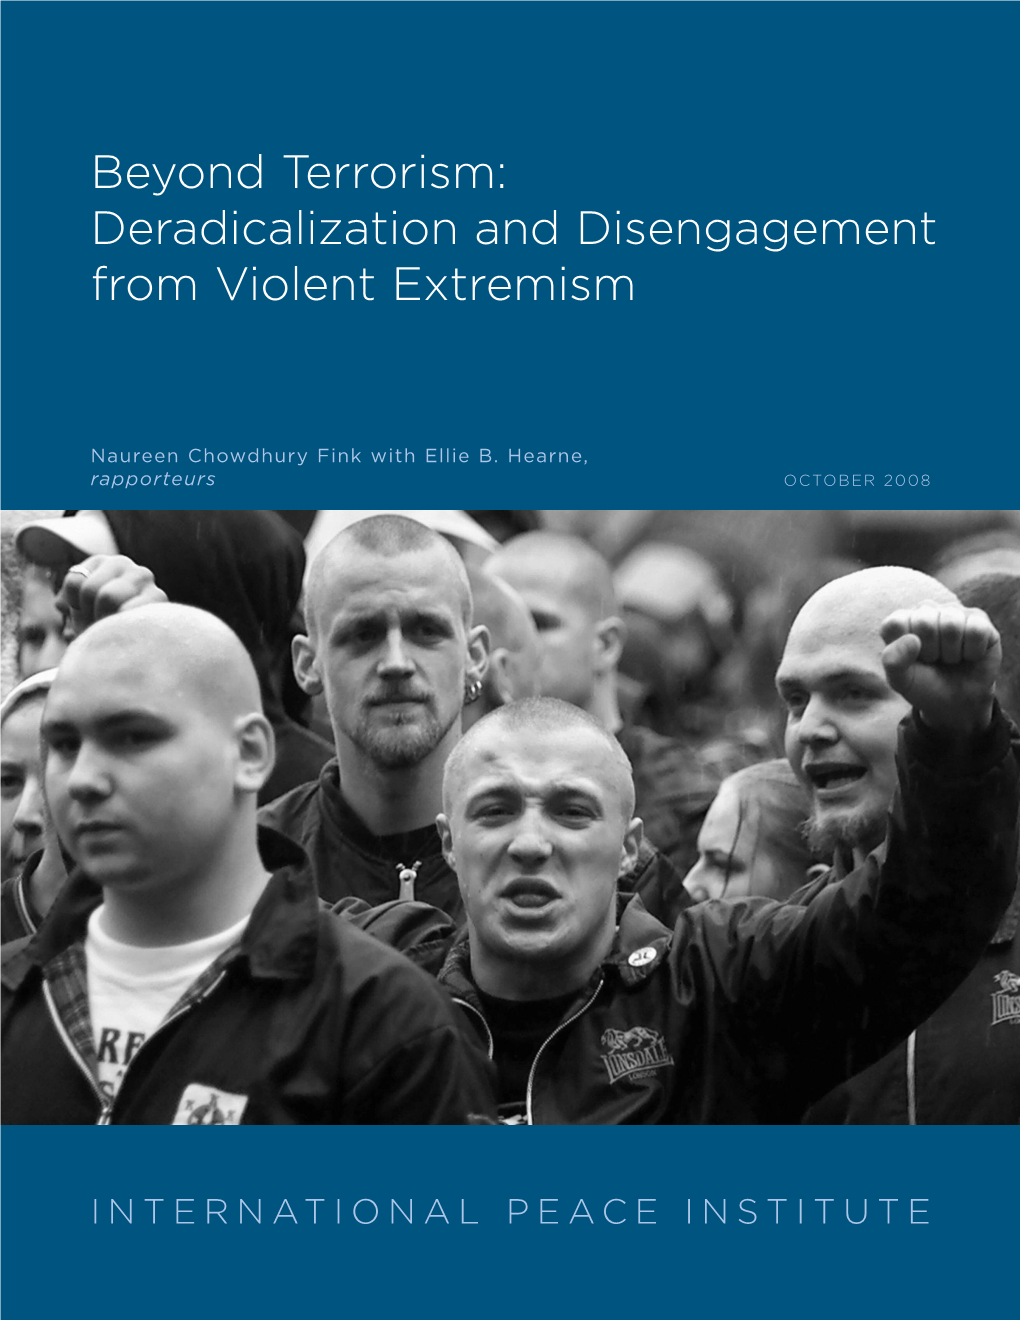 Deradicalization and Disengagement from Violent Extremism